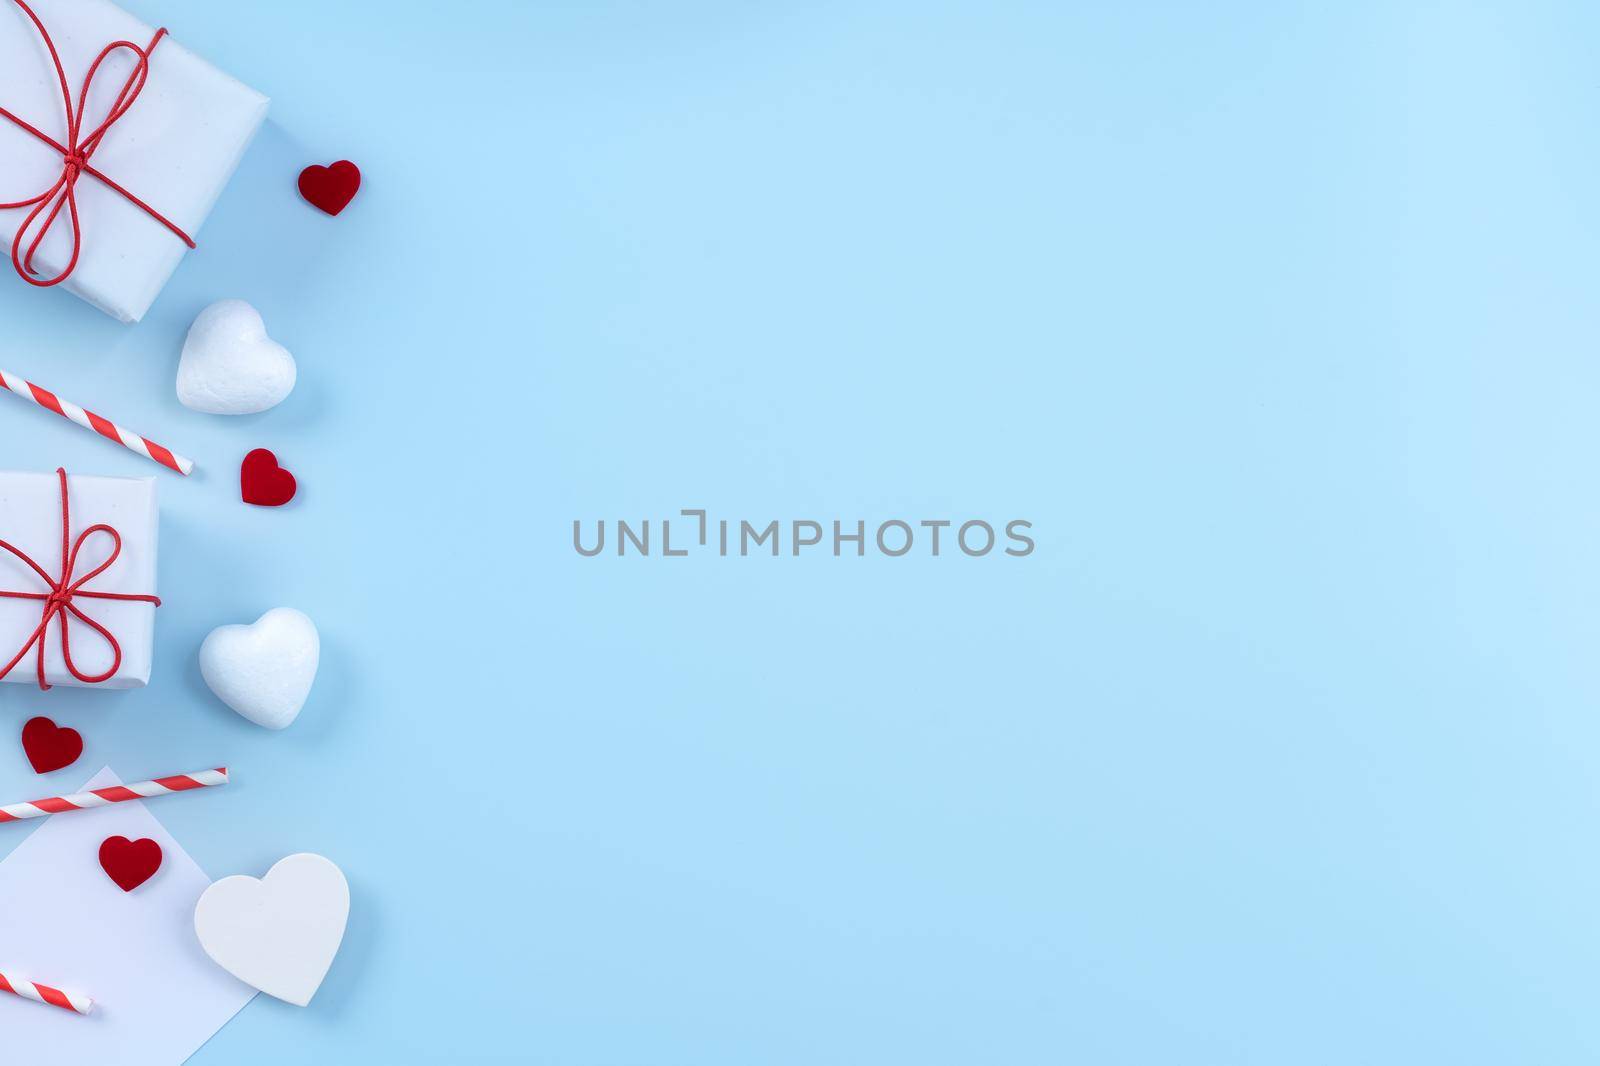 Valentine's Day, Mother's day art design concept - Red, white wrapped gift box isolated on pastel light blue color background, flat lay, top view.